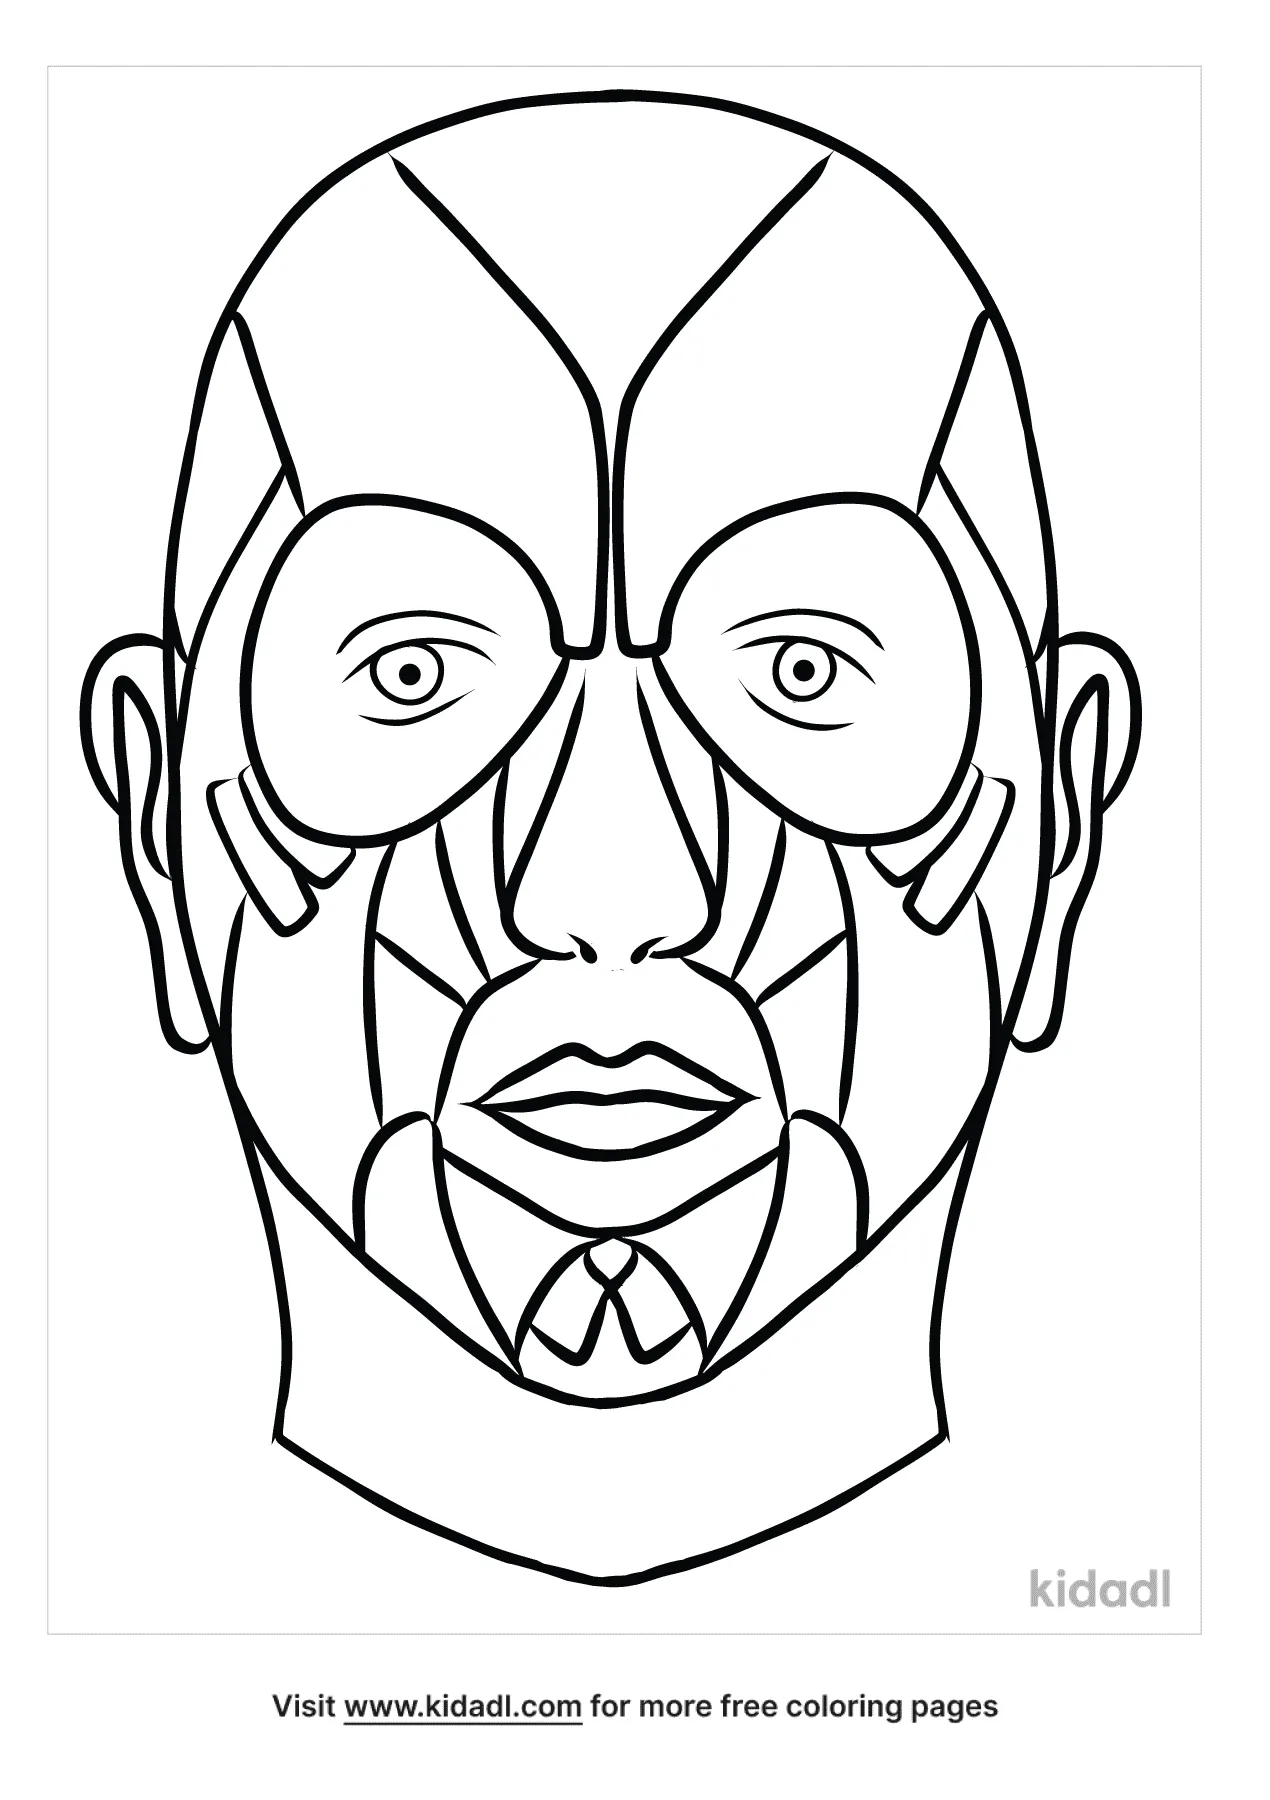 Muscles Of Facial Expression Coloring Page